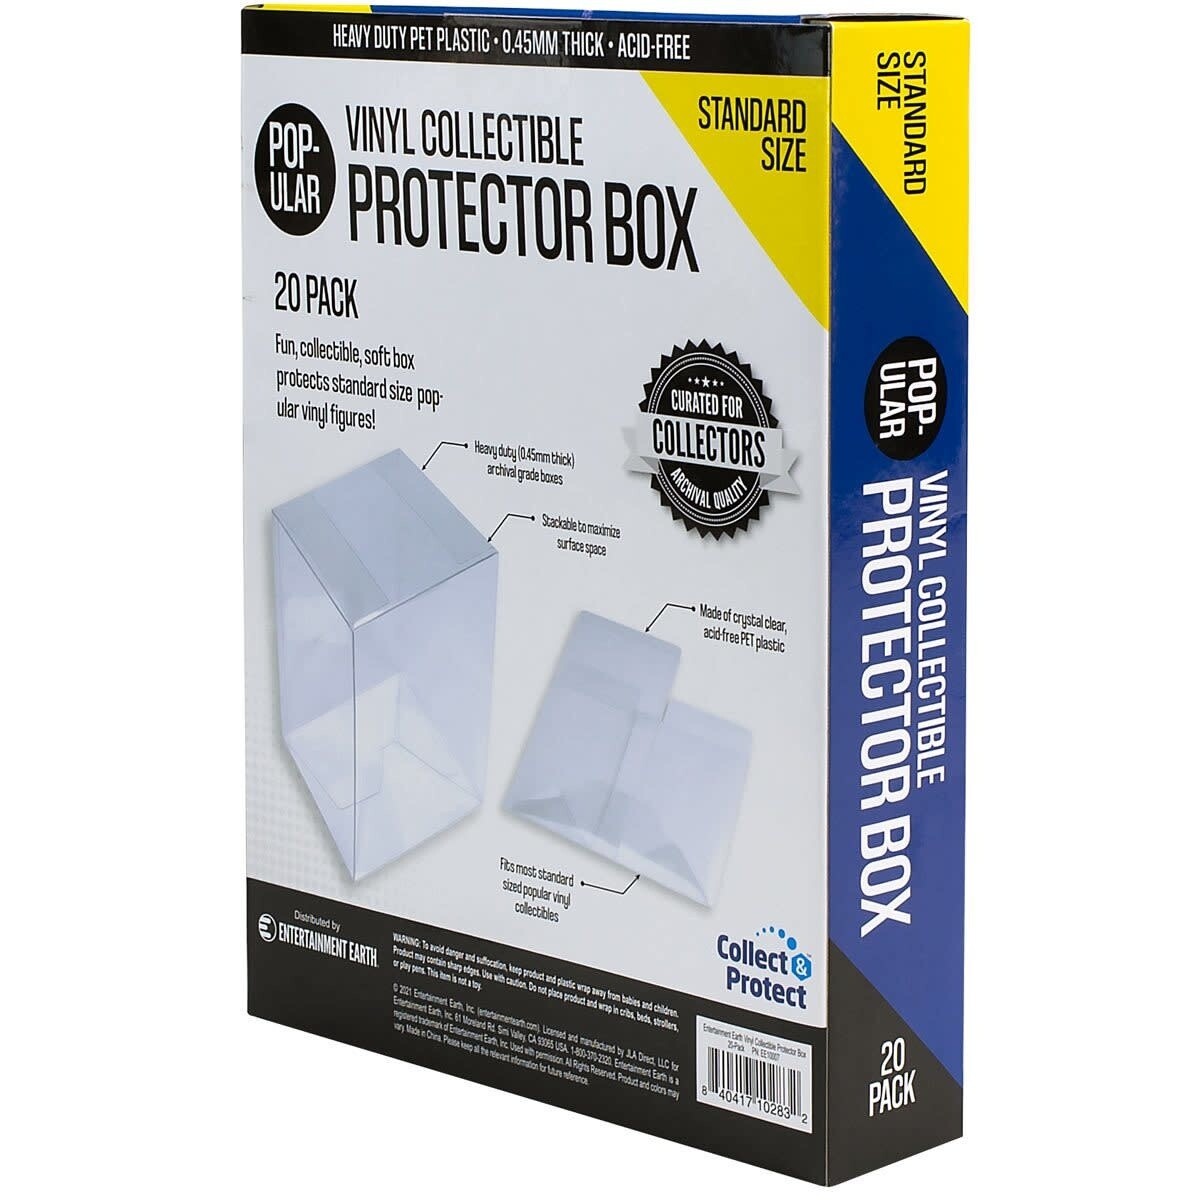 Entertainment Earth Vinyl Collectible Soft Collapsible Protector Box 20-Pack